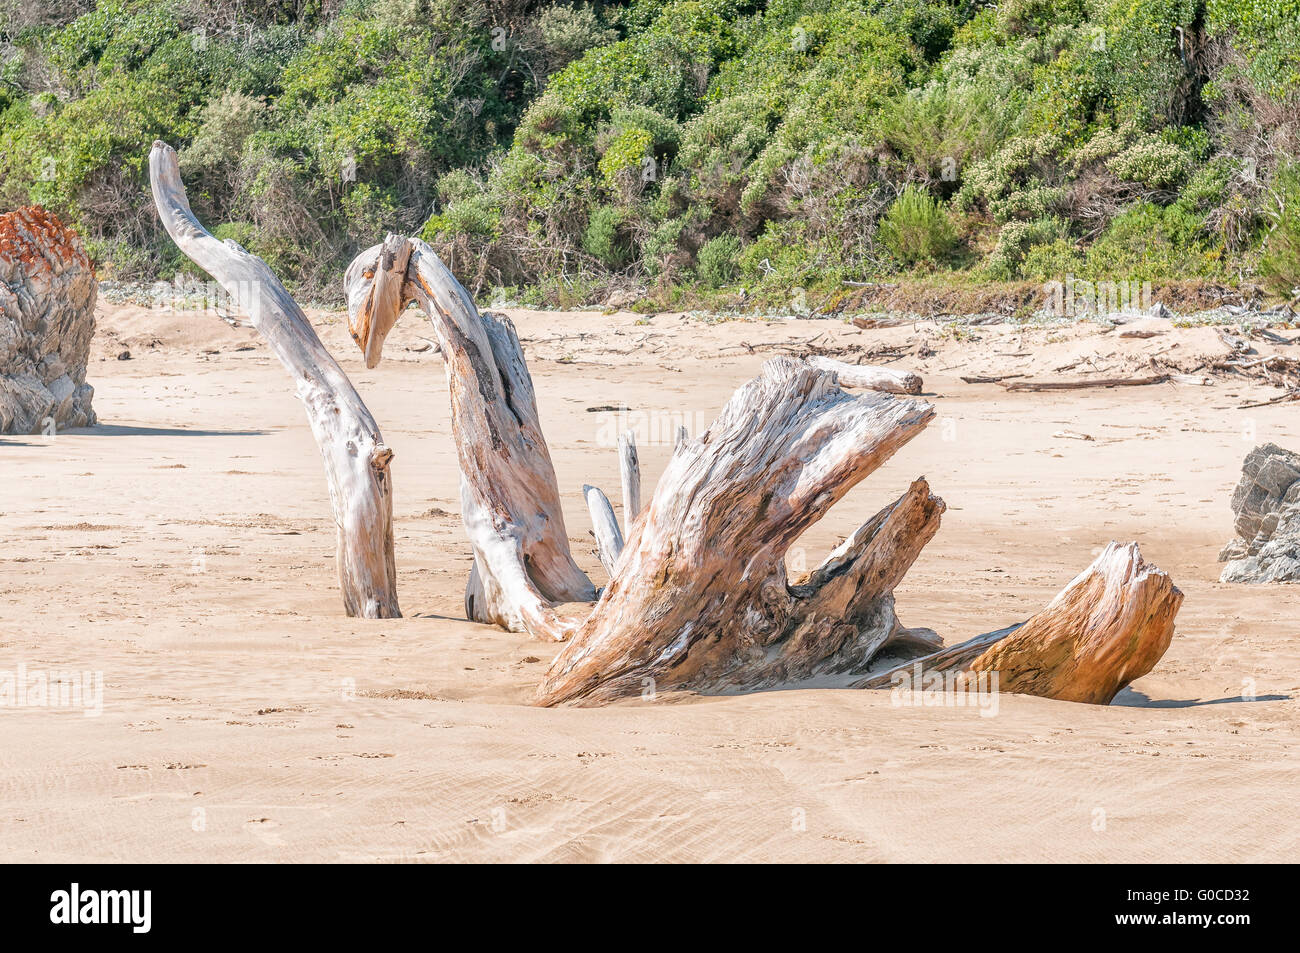 A natural wooden sculpture on a beach at The Point at the small town of Natures Valley Stock Photo